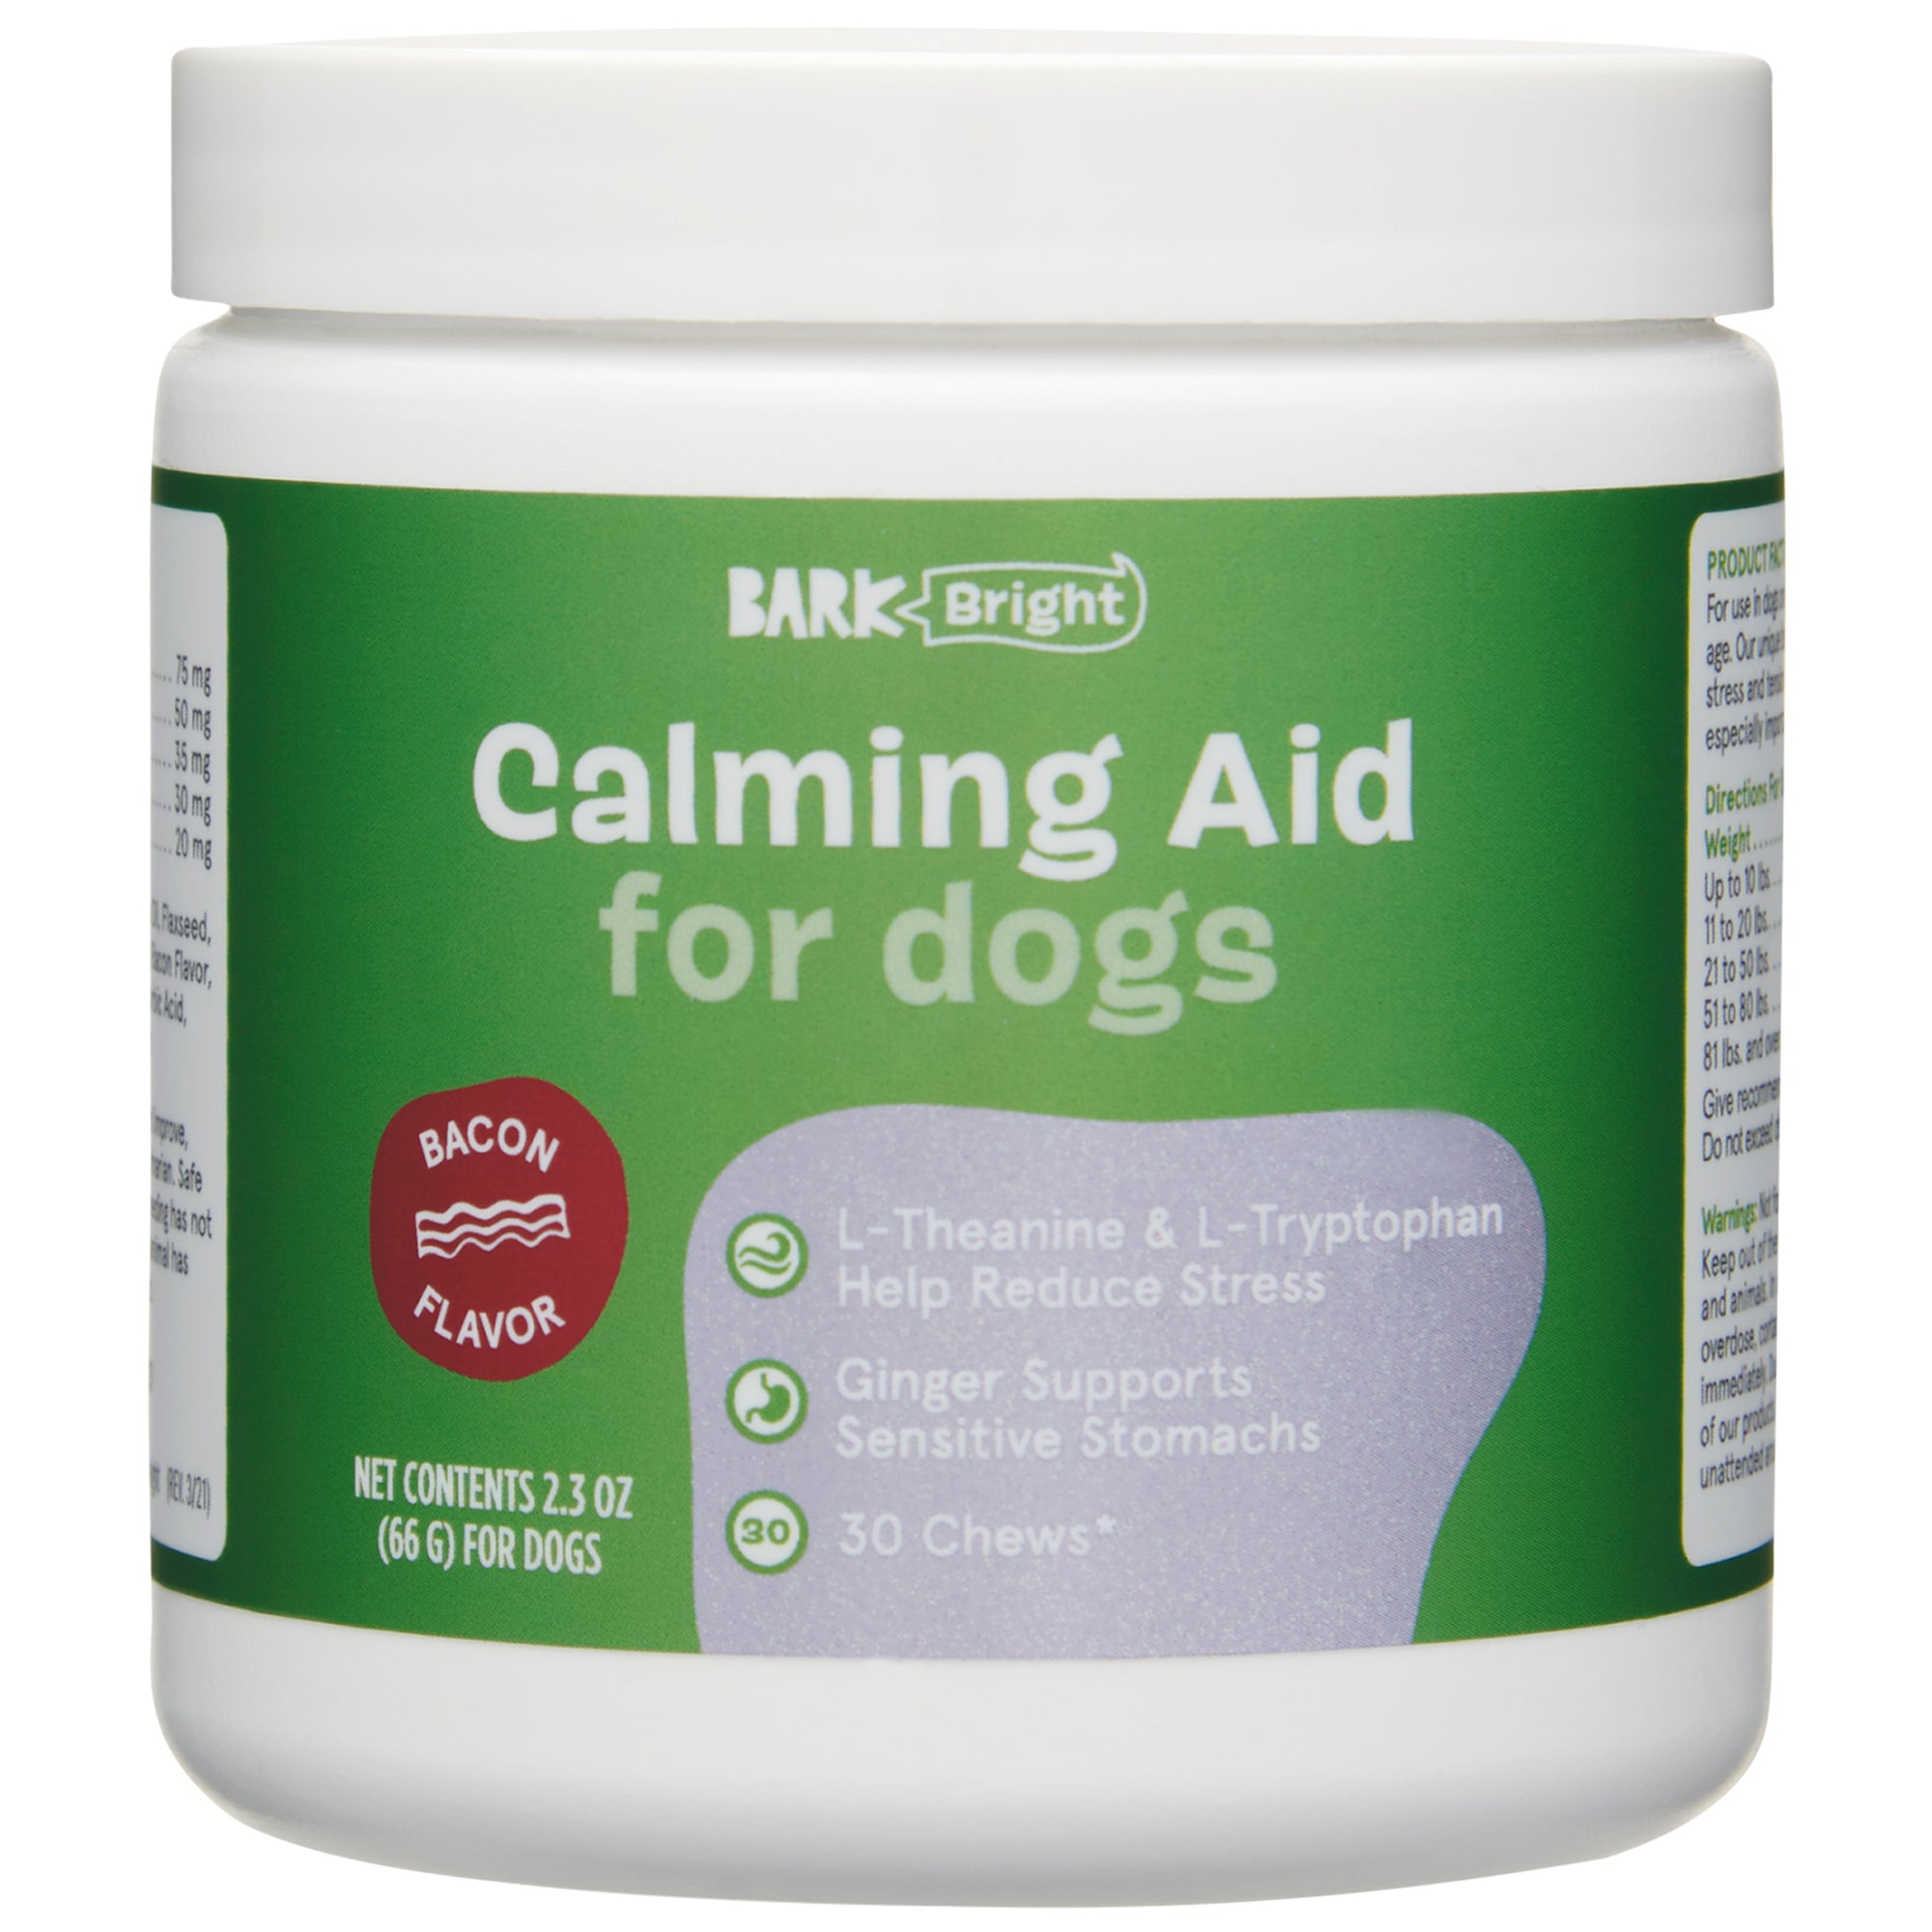 Calming Aid For Dogs